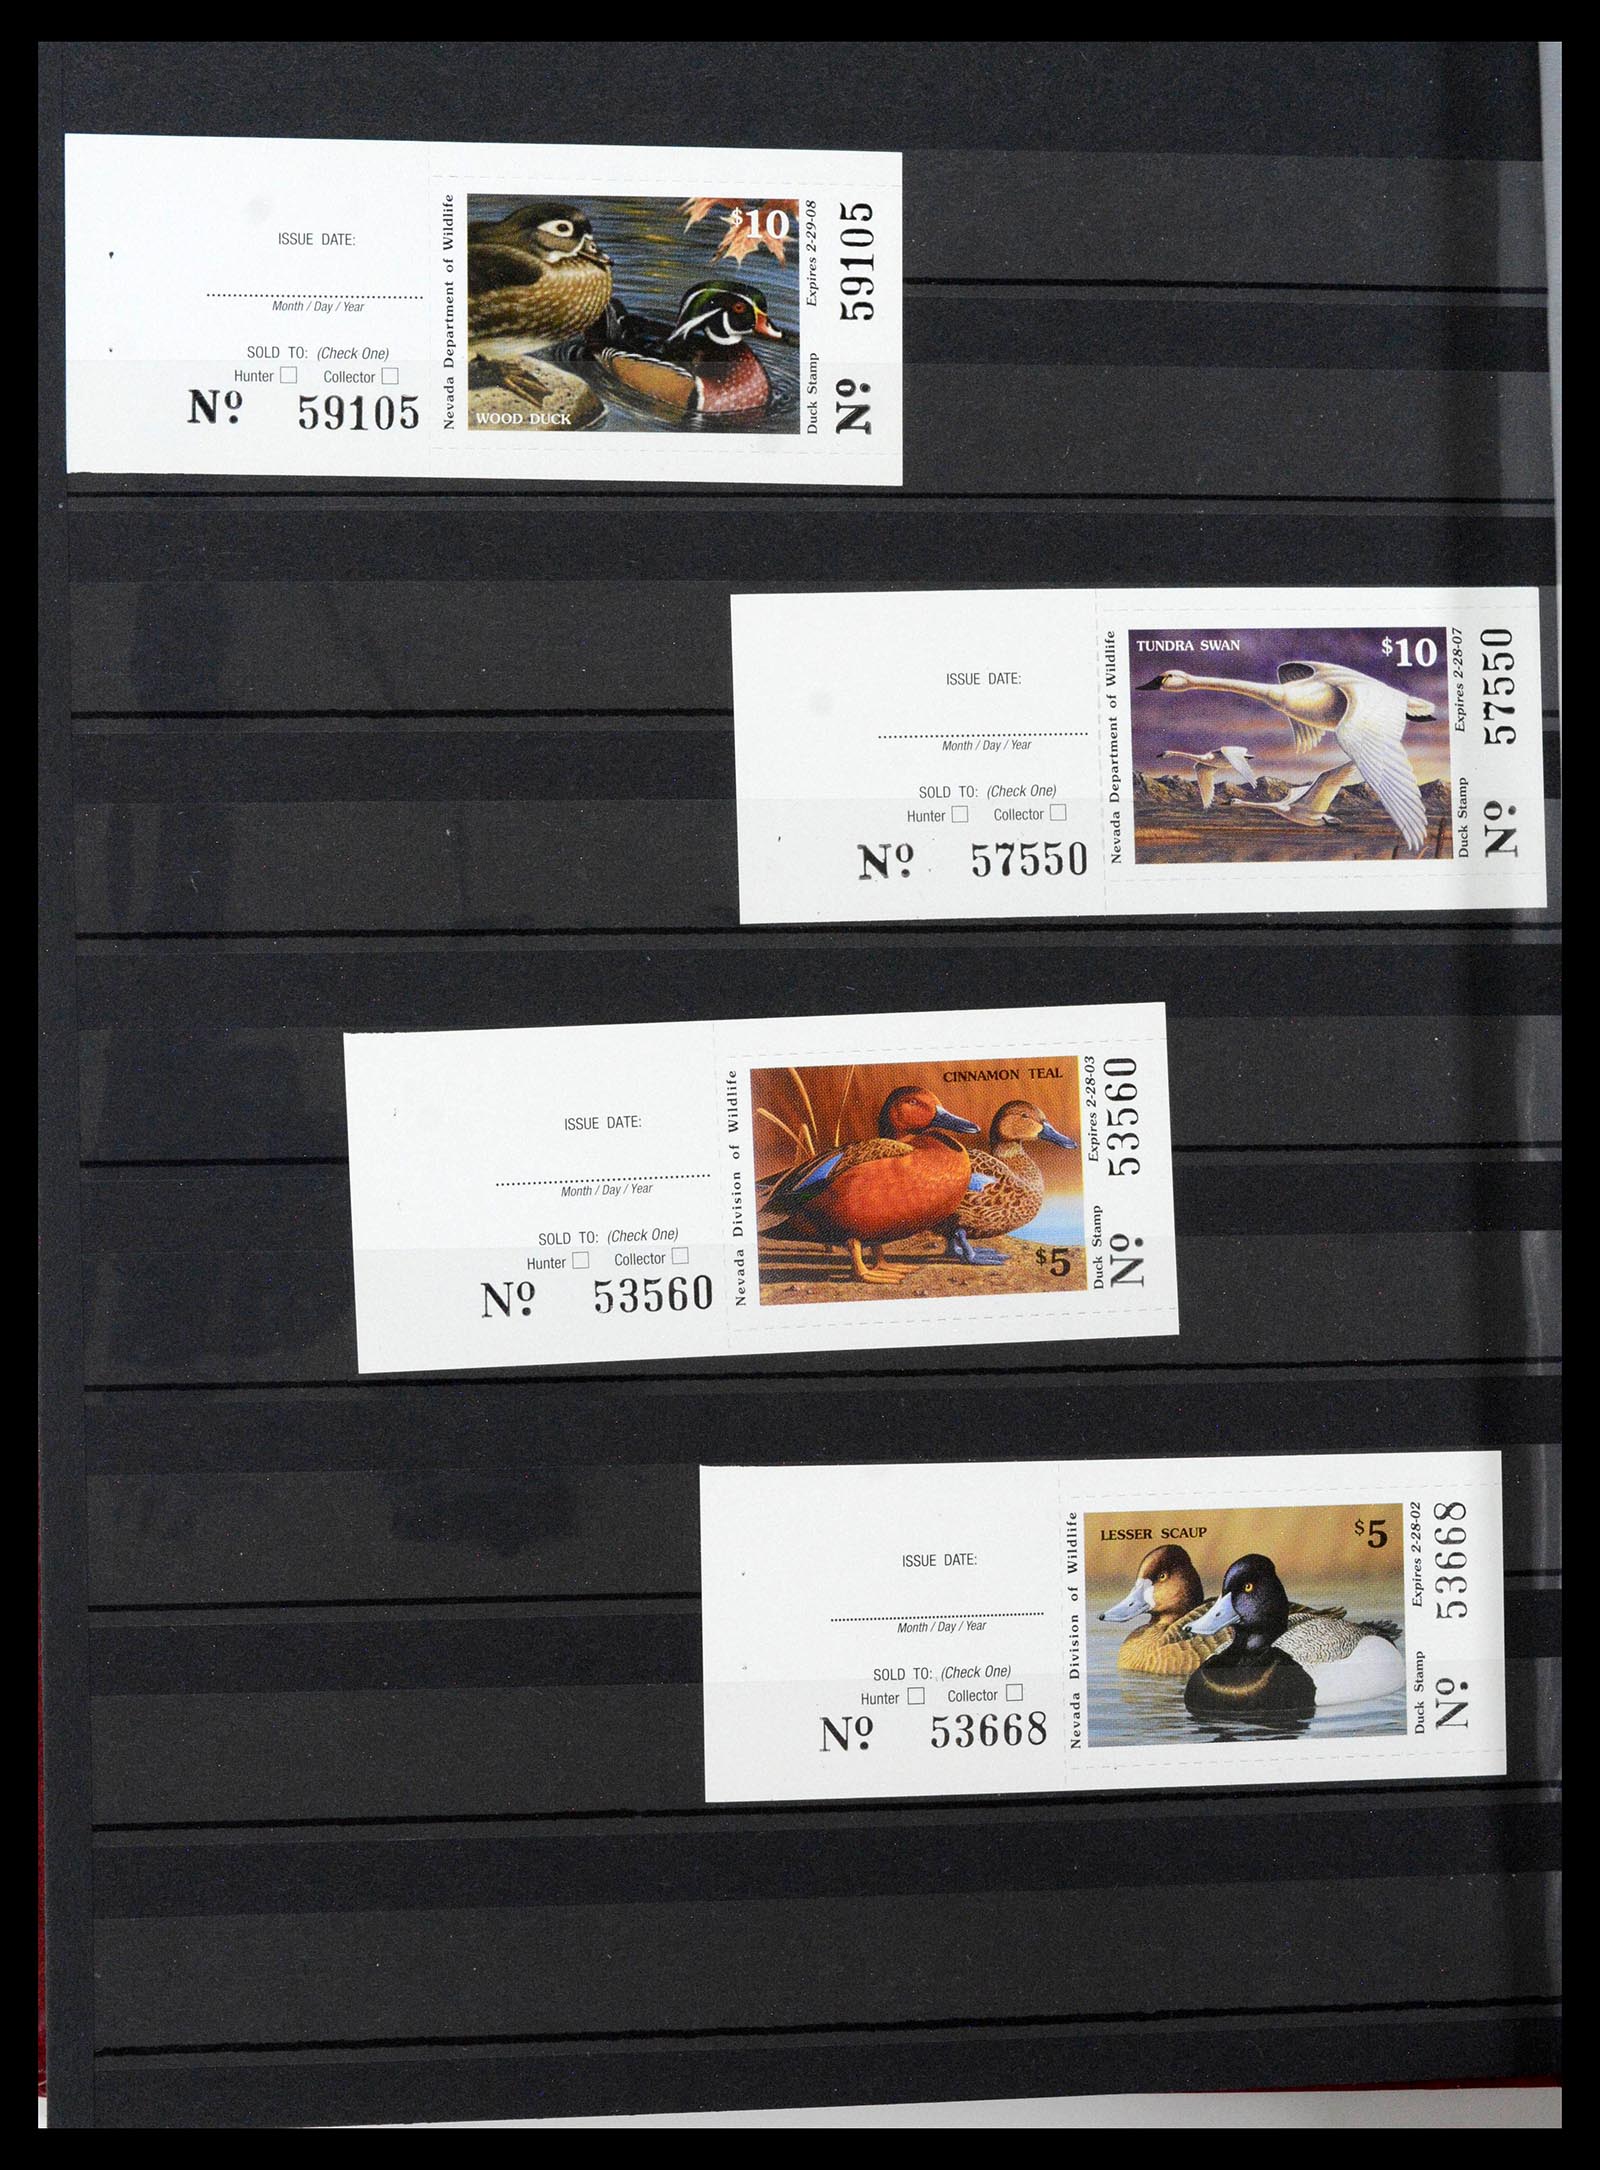 39426 0016 - Stamp collection 39426 USA duckstamps 1934-2007.